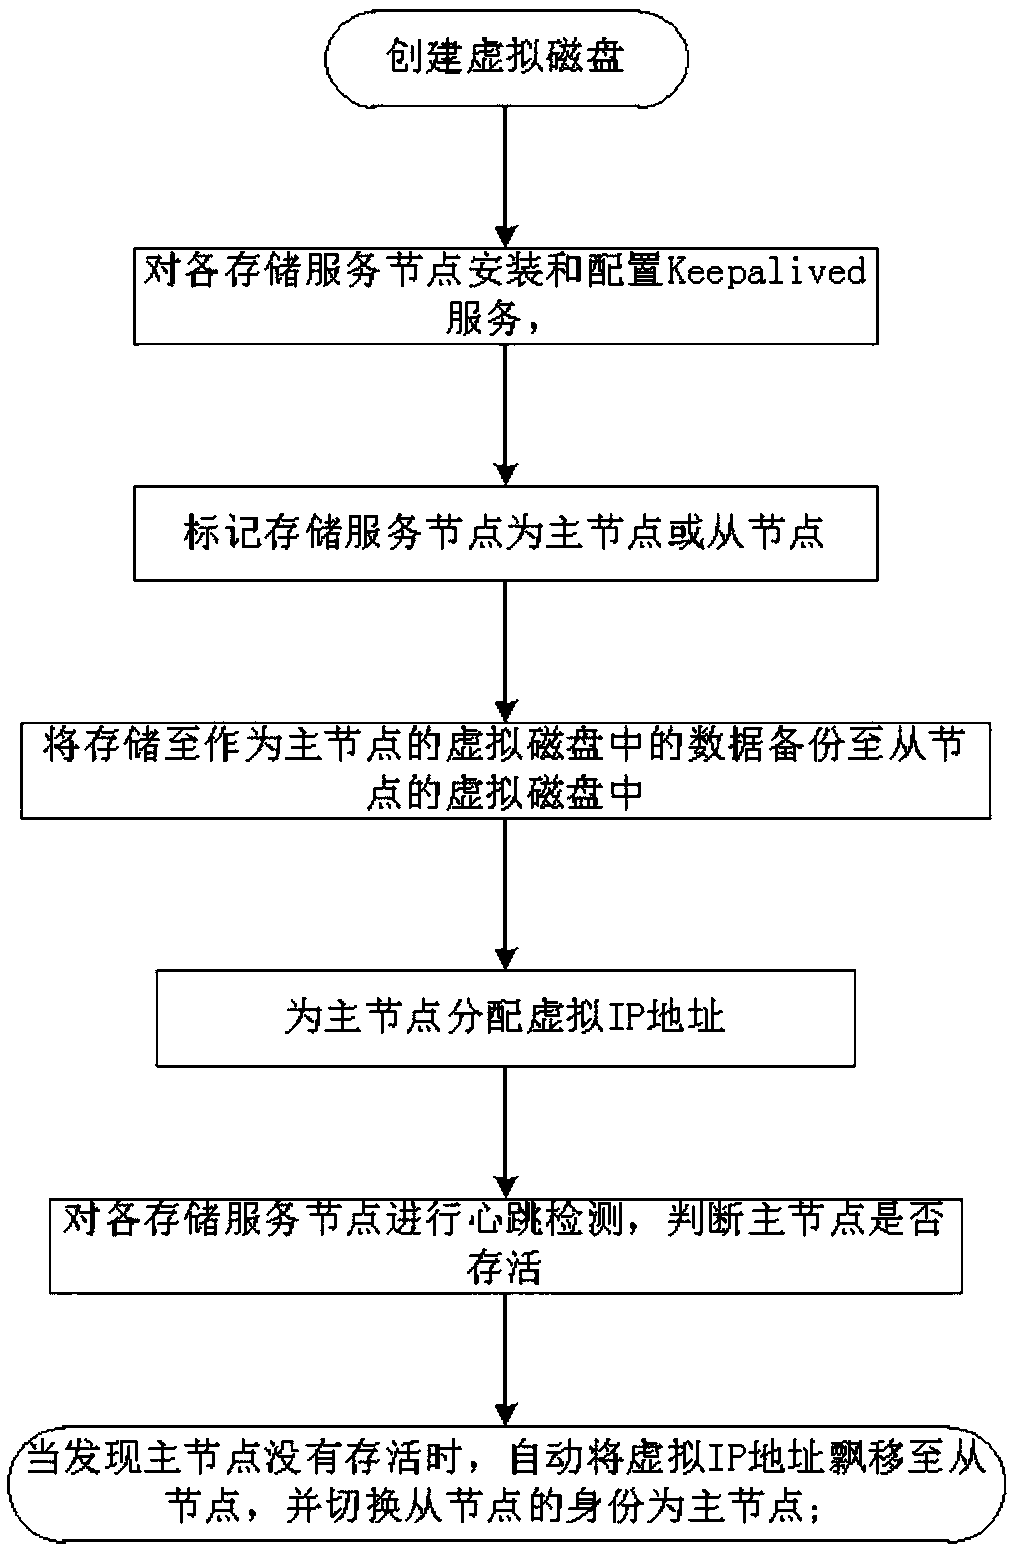 Storage fault fast switching processing method